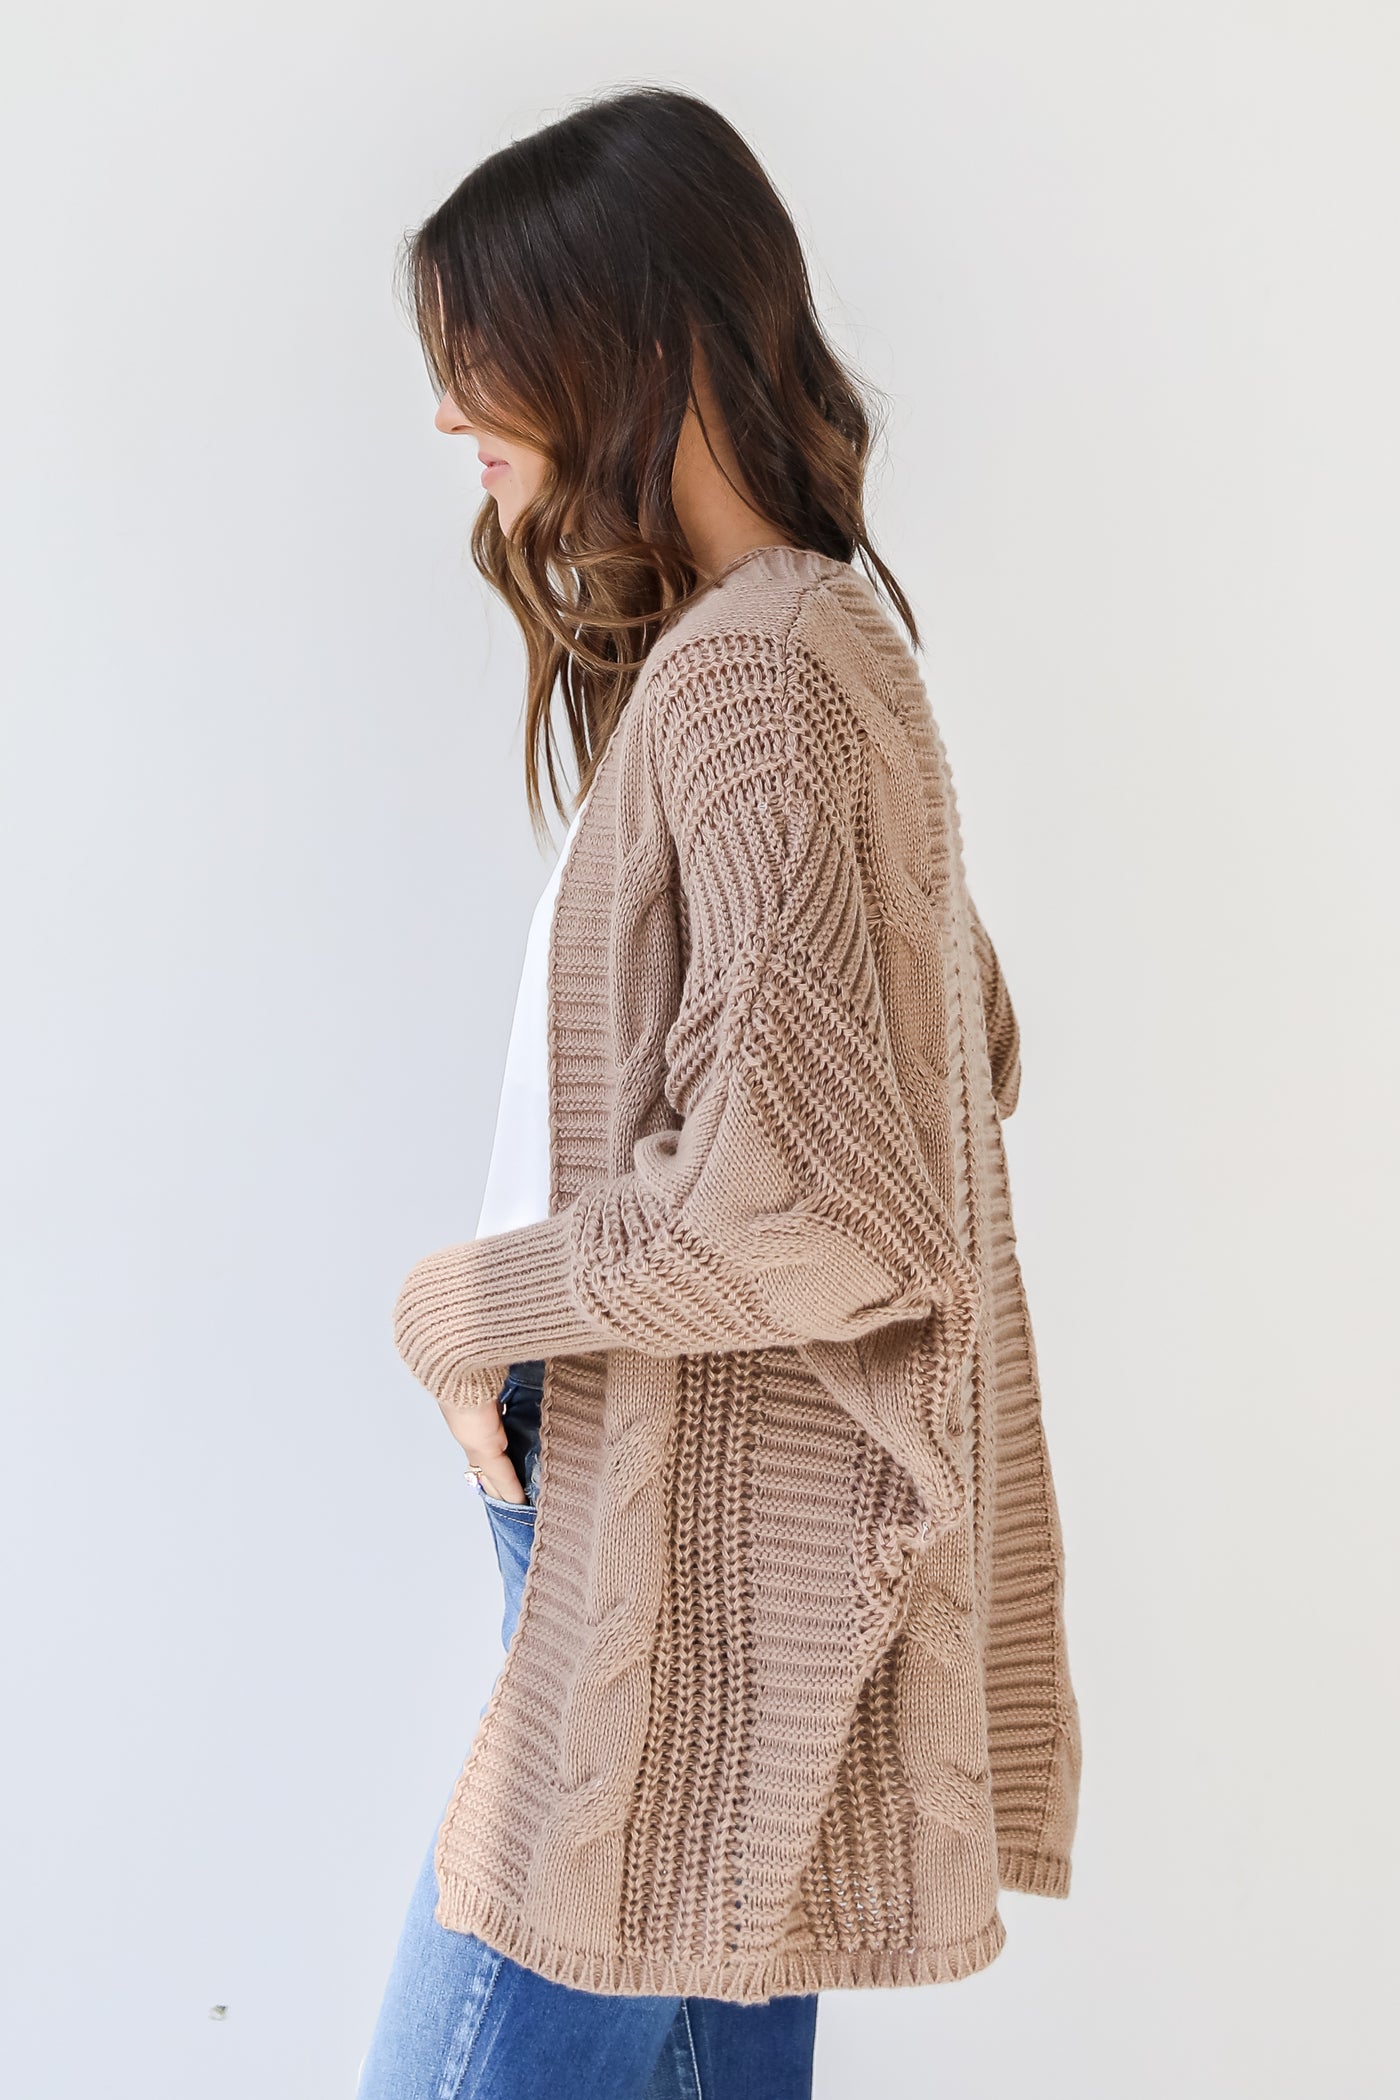 Sweater Cardigan in taupe side view